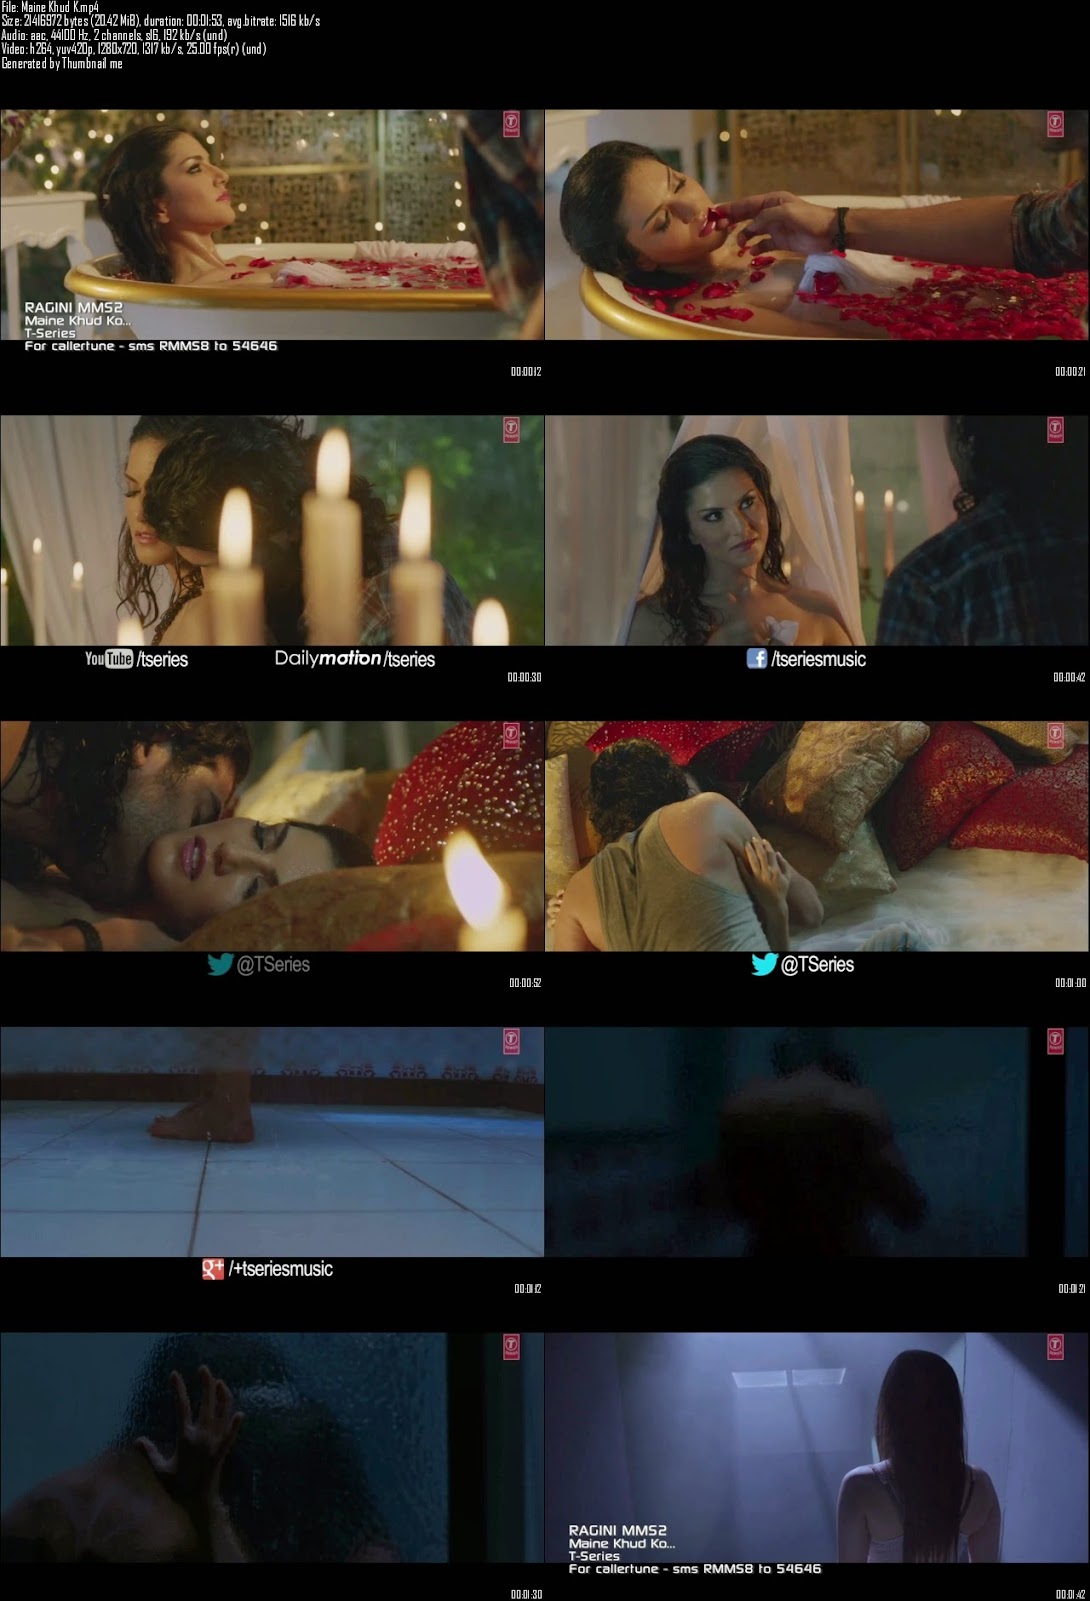 Mediafire Resumable Download Link For Video Song Maine Khud Ko - Ragini MMS 2 (2014)